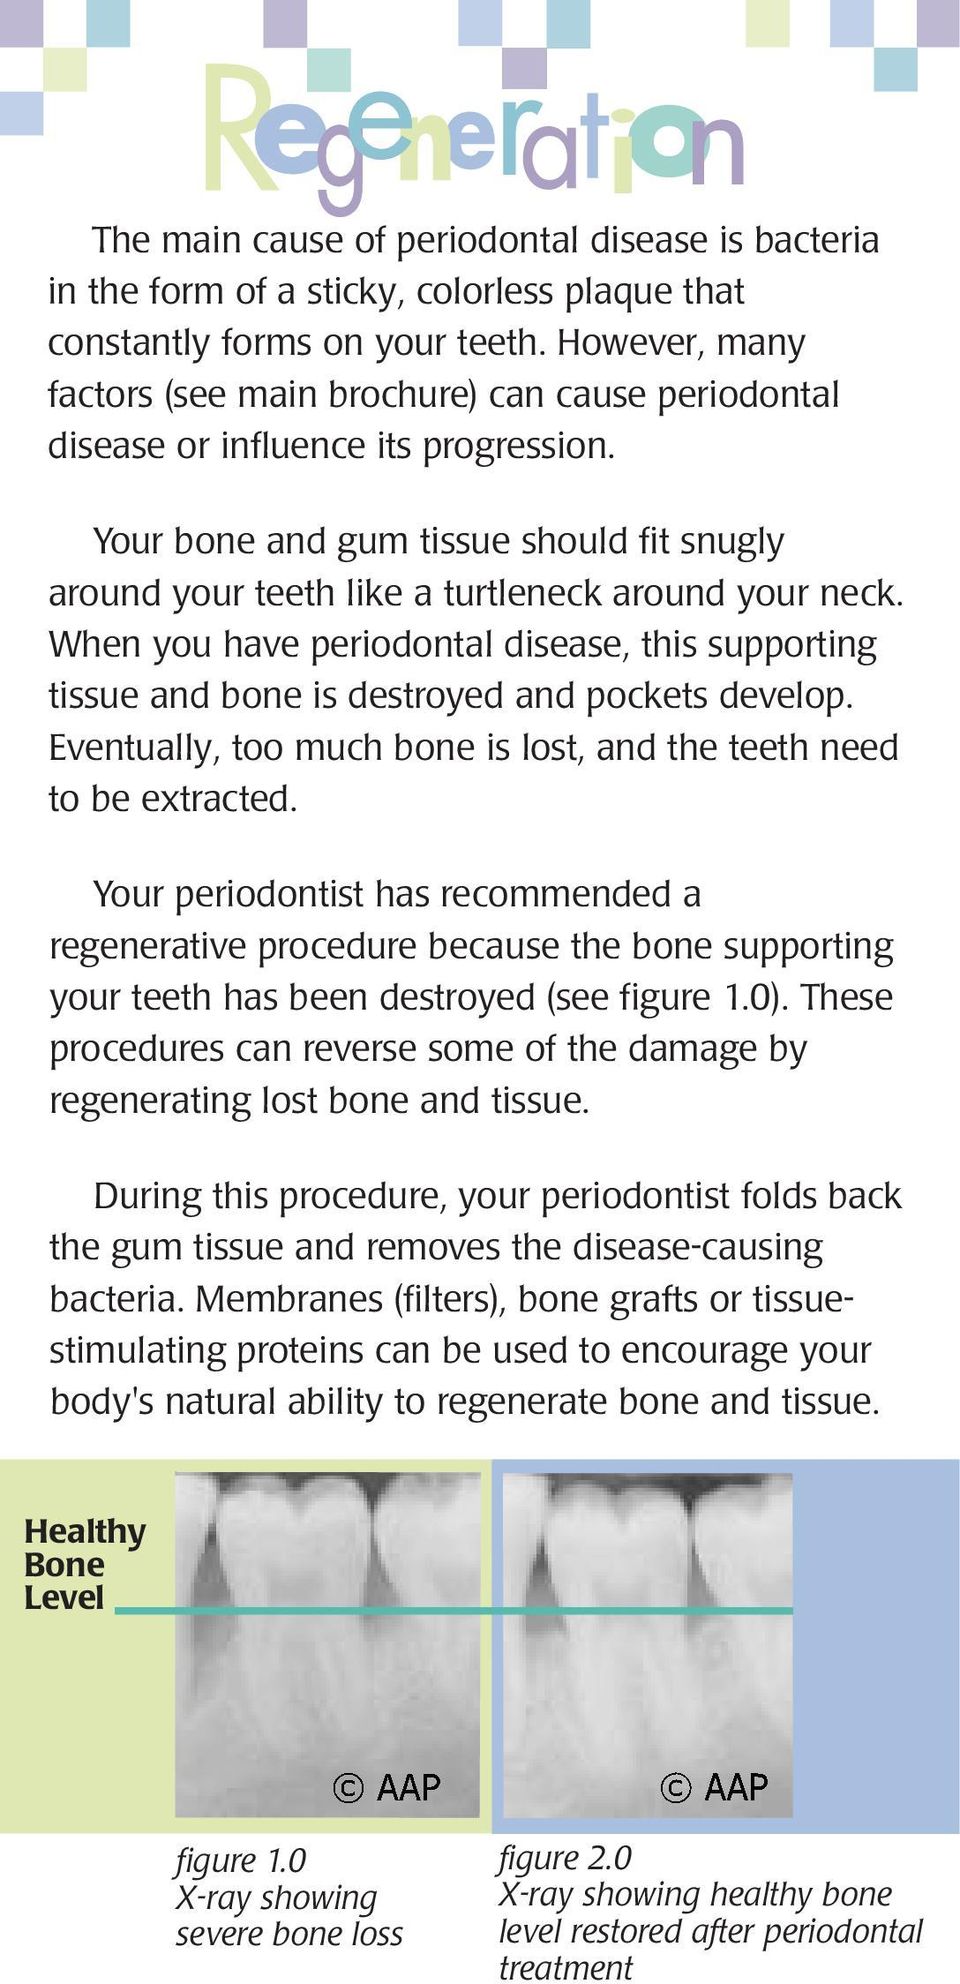 When you have periodontal disease, this supporting tissue and bone is destroyed and pockets develop. Eventually, too much bone is lost, and the teeth need to be extracted.